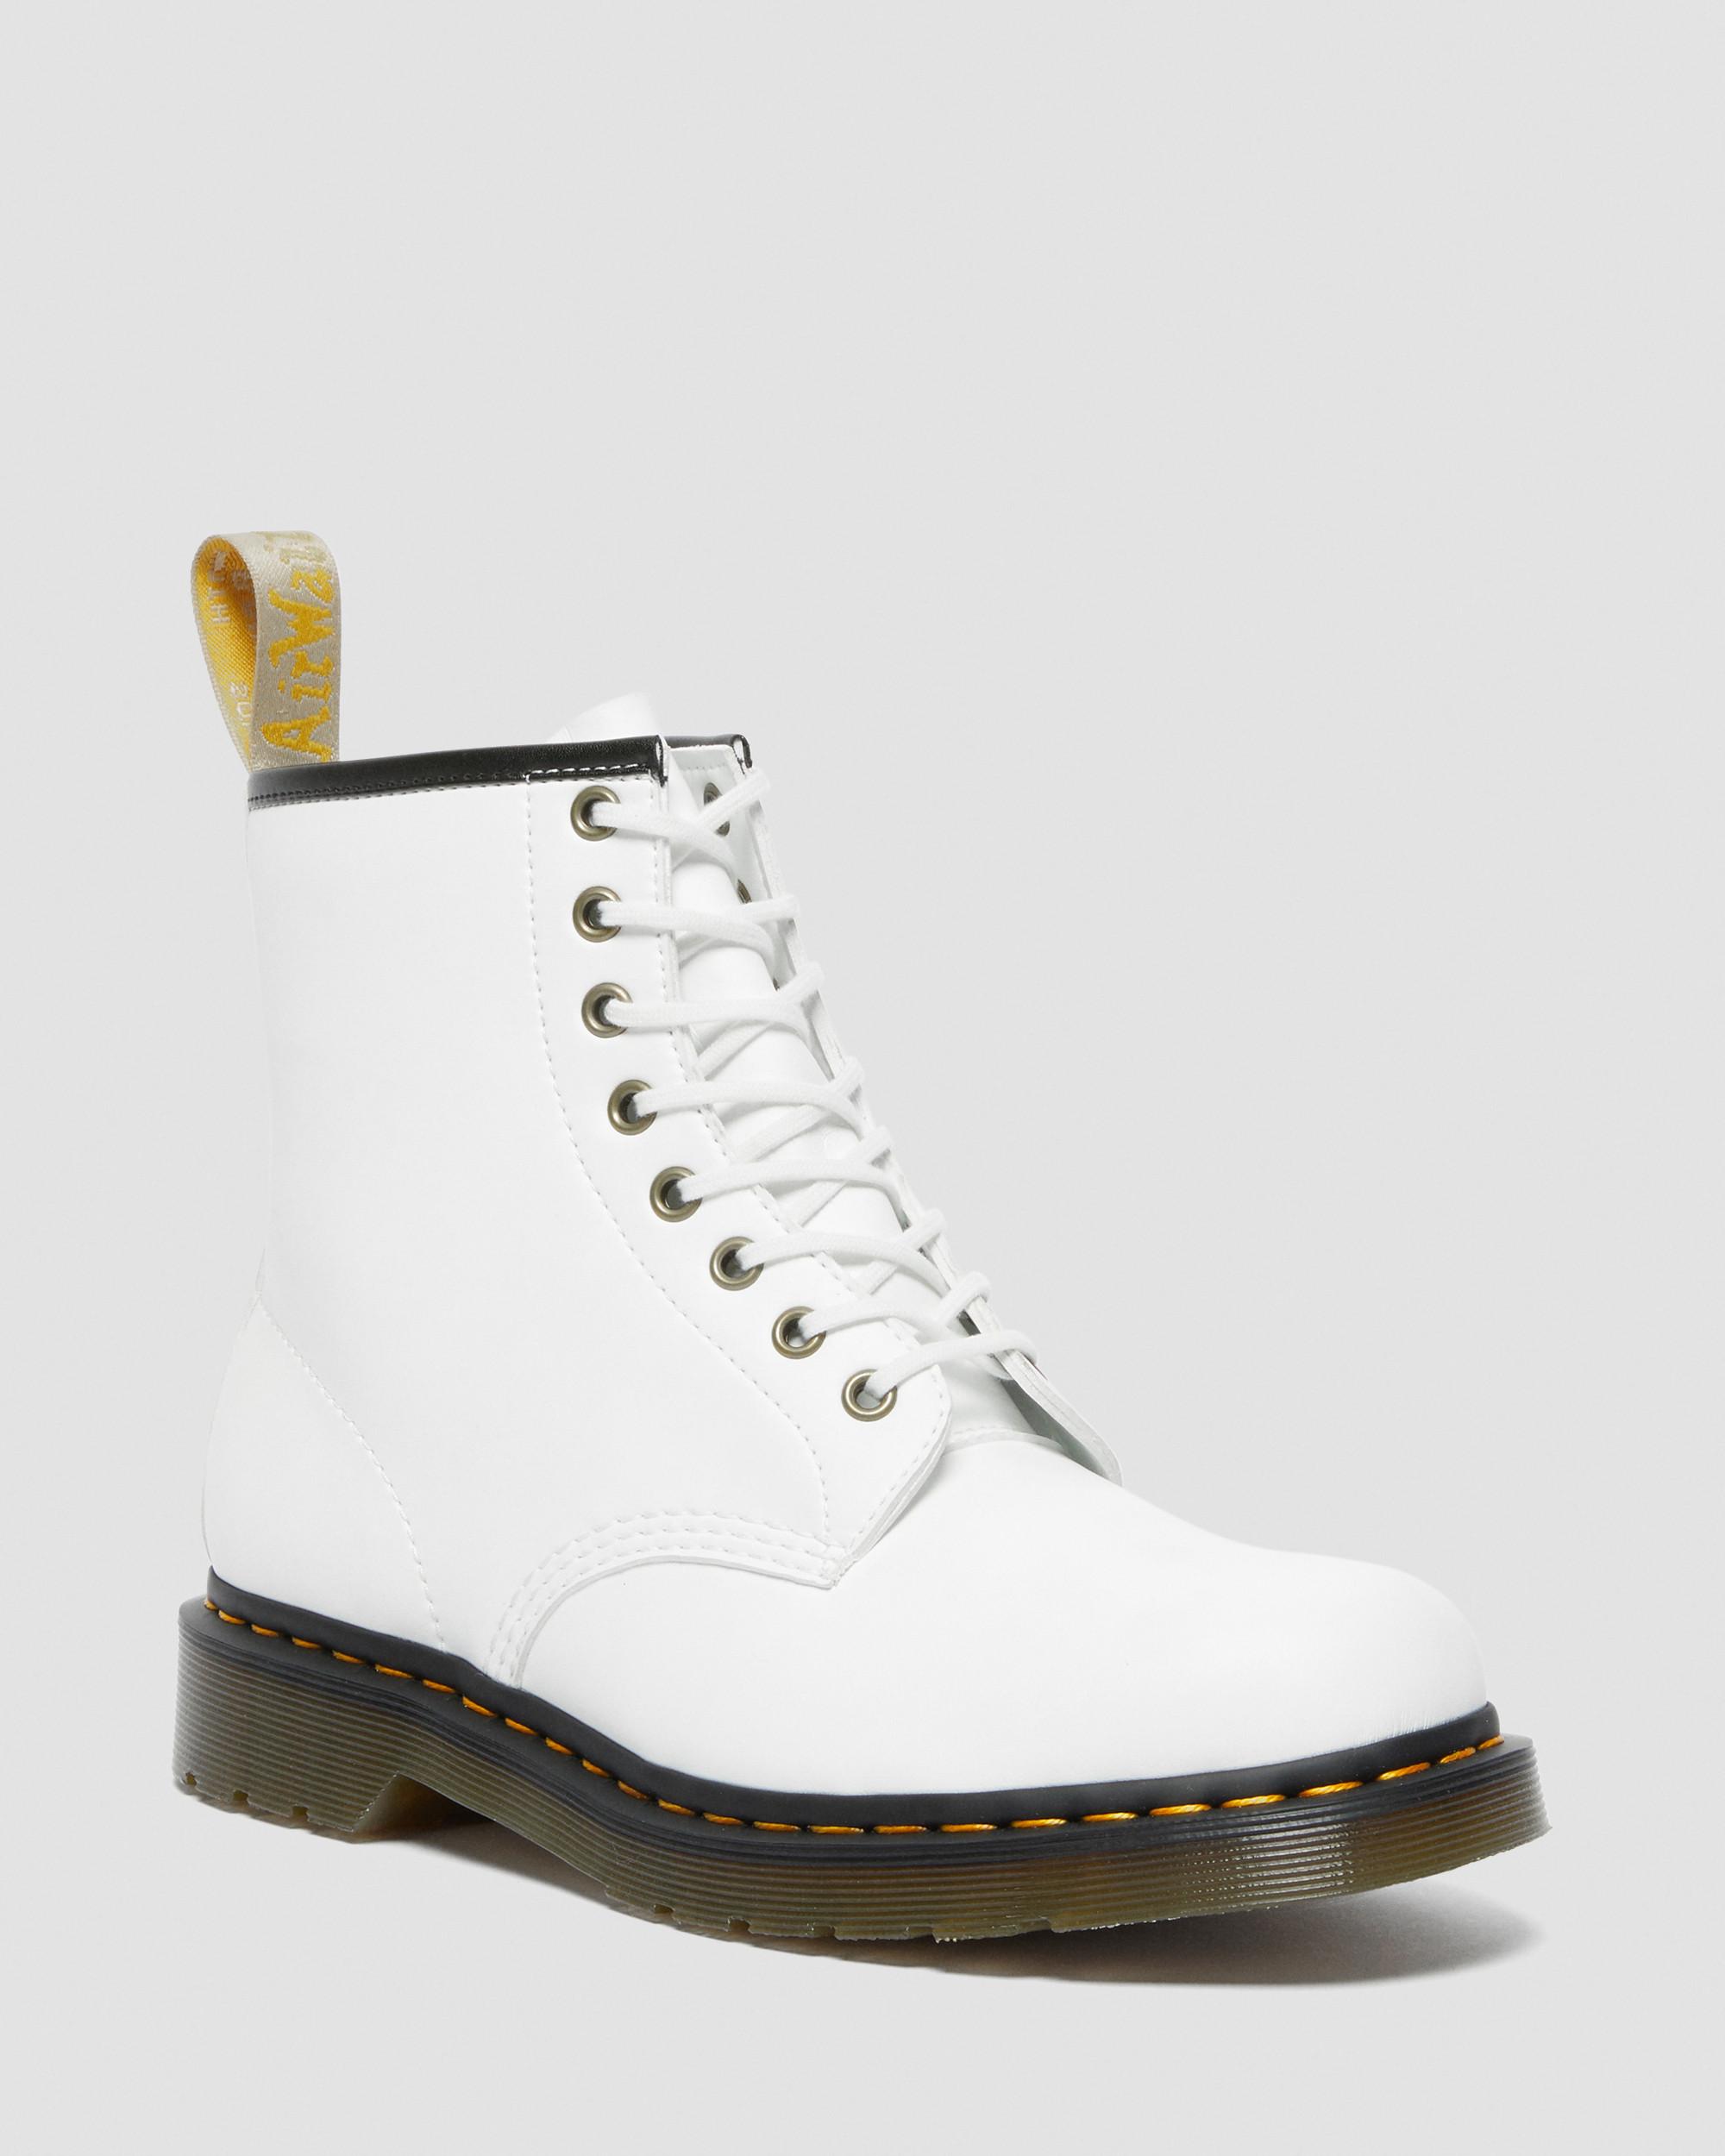 The Official CA Dr Martens Store